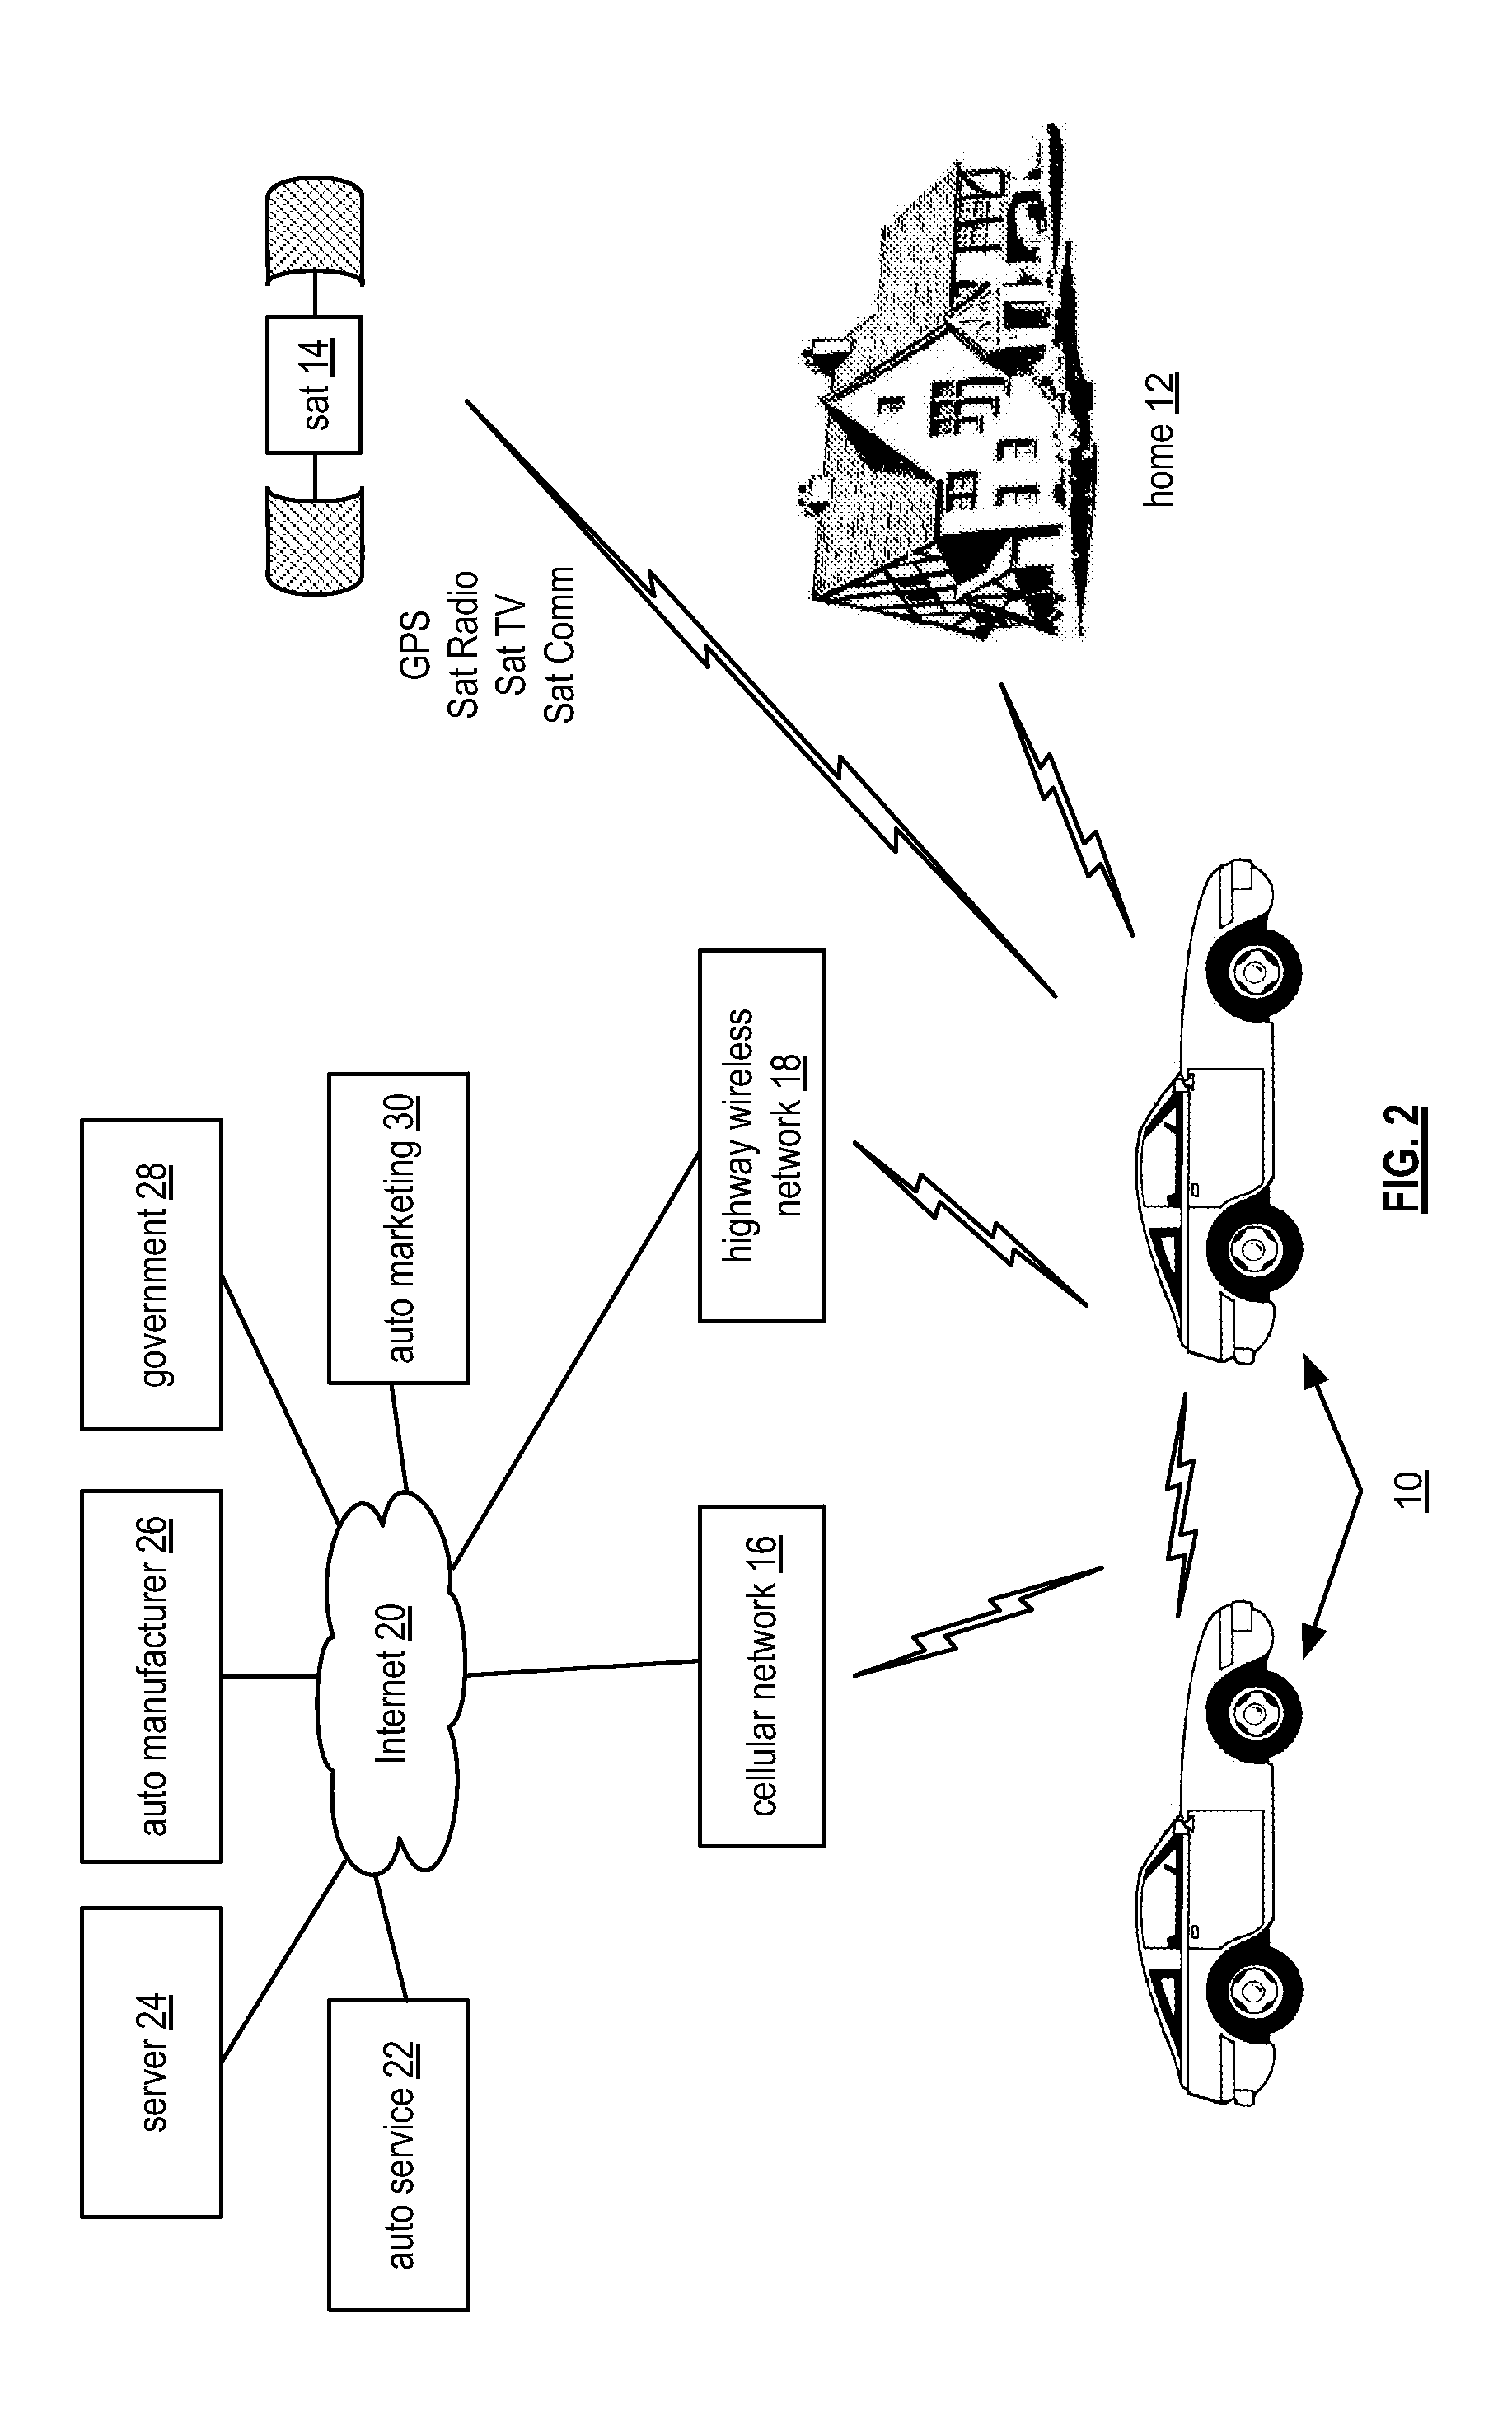 Unified vehicle network frame protocol